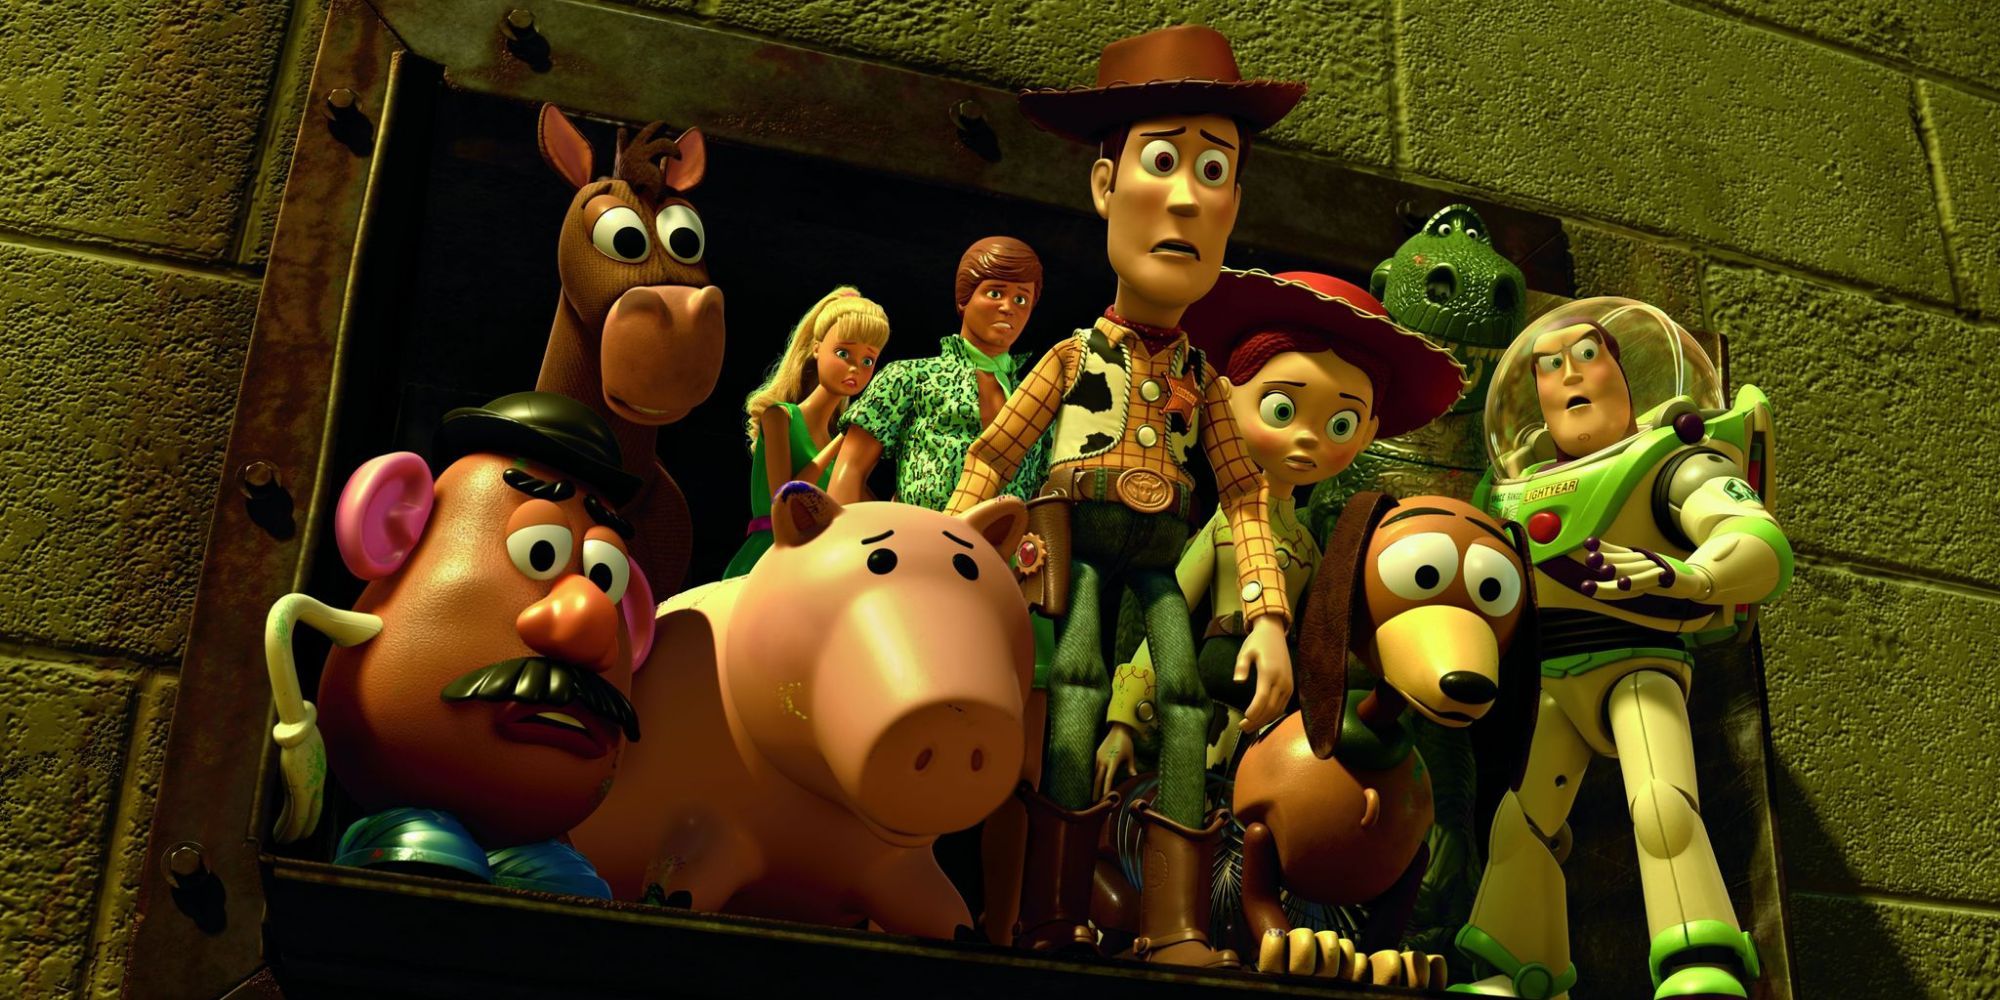 The toys in Toy Story 3 huddled together